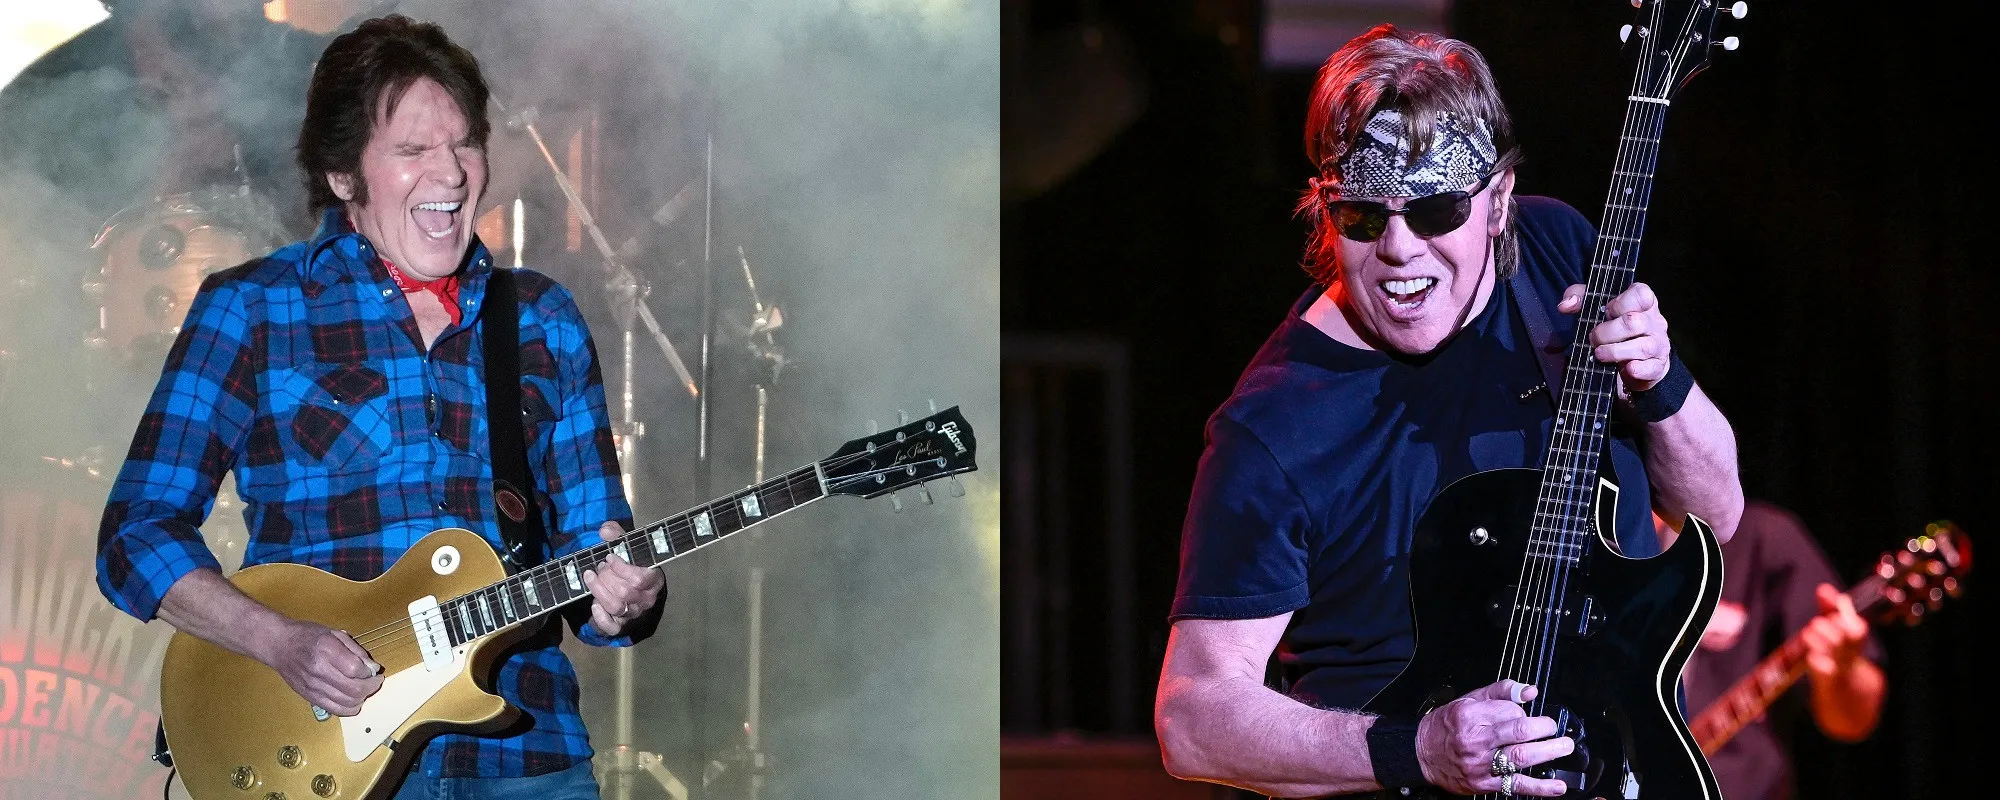 Watch John Fogerty and George Thorogood Recall Being “Gobsmacked” by Jimi Hendrix